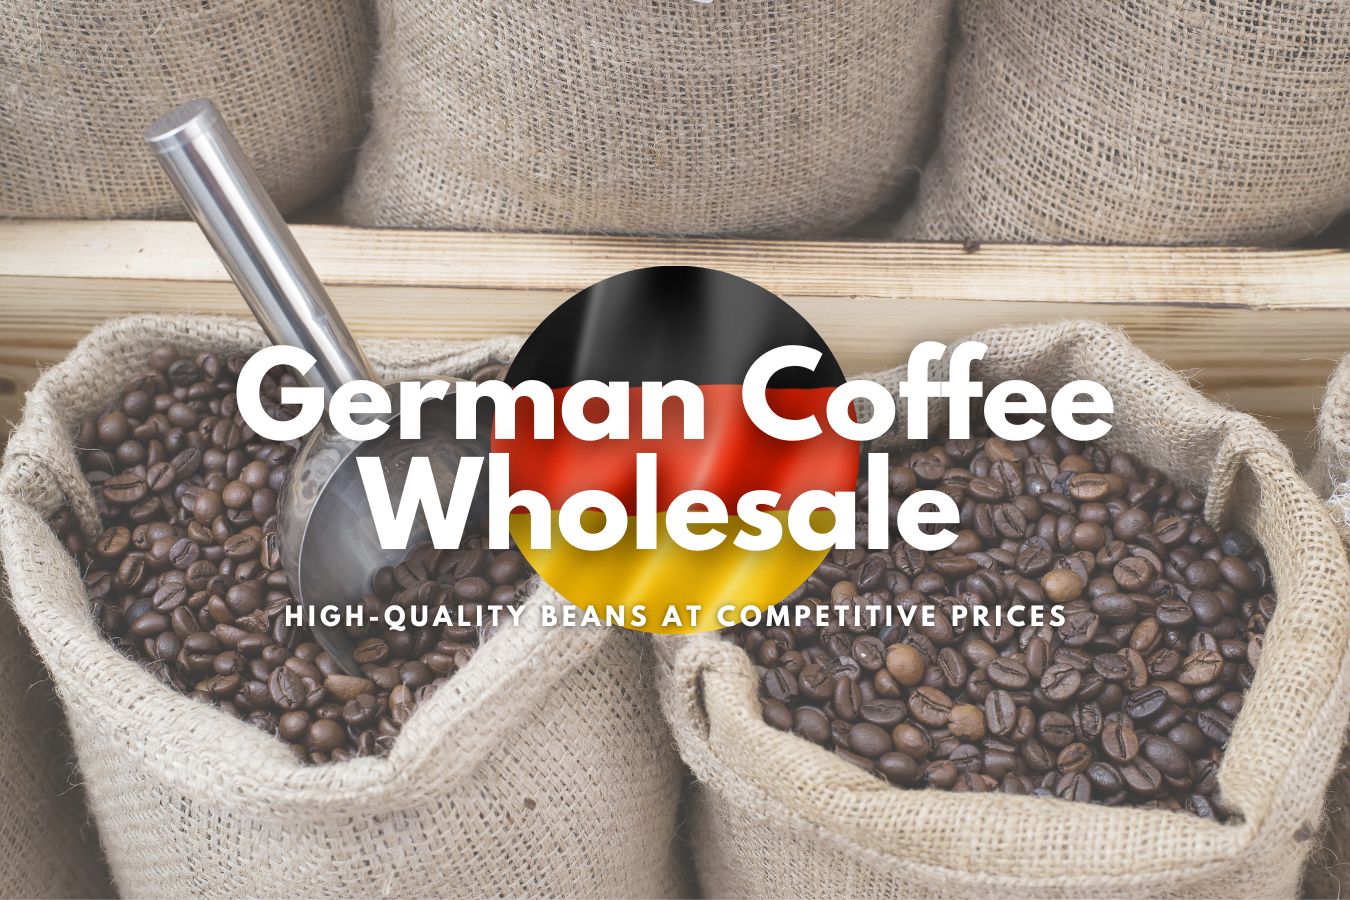 German Coffee Wholesale High-Quality Beans at Competitive Prices